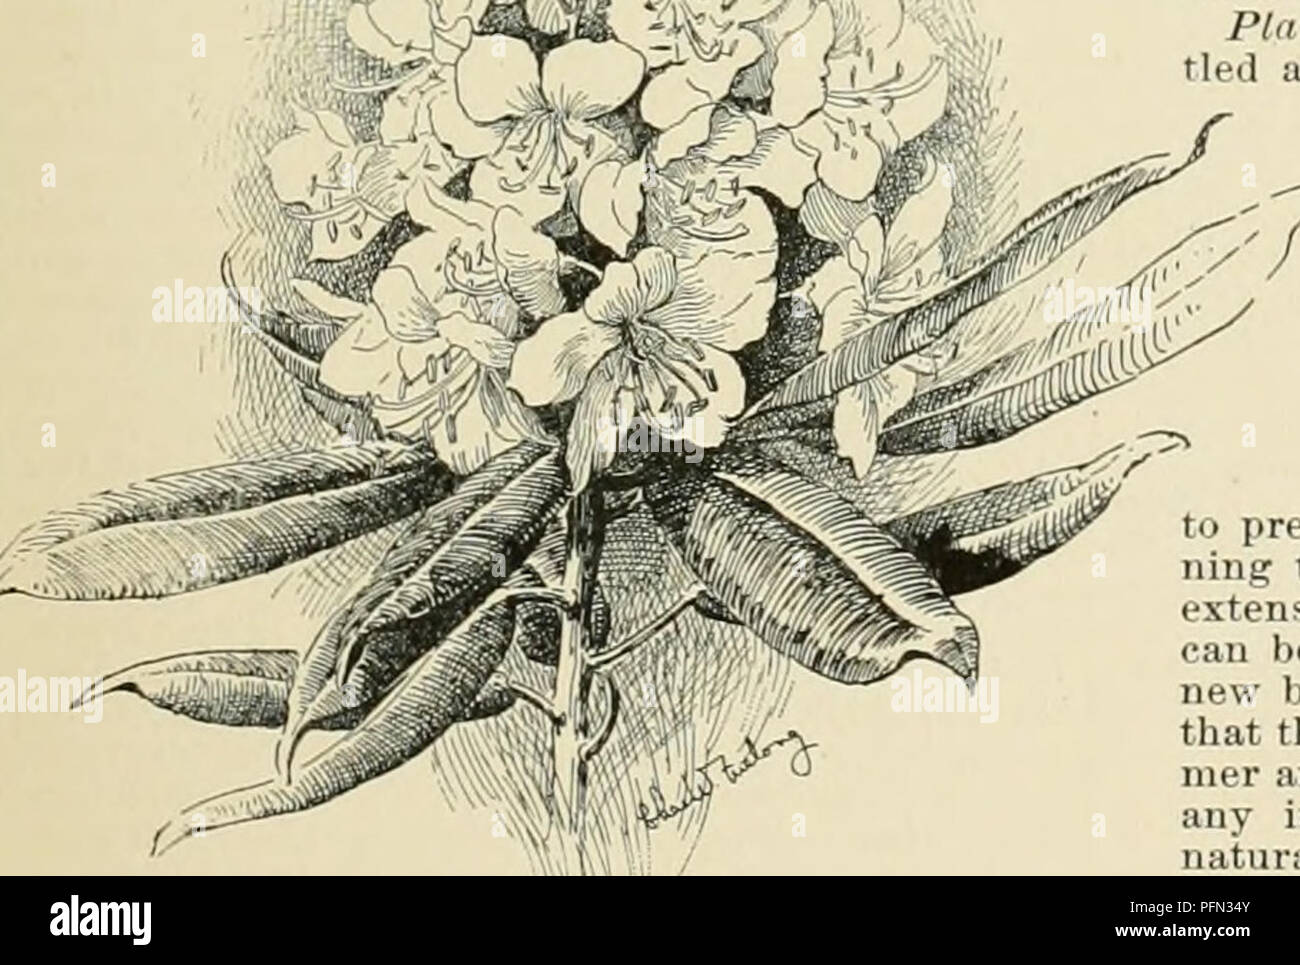 . Cyclopedia of American horticulture, comprising suggestions for cultivation of horticultural plants, descriptions of the species of fruits, vegetables, flowers, and ornamental plants sold in the United States and Canada, together with geographical and biographical sketches. Gardening. the. 2106. A common hybrid form of Garden Rhododendron. are retentive of moisture; (2) plant in masses, at any rate while young, so thsit they may protect each other and prevent evaporation; (3) sive the bed a northern exposure or a situation where the force of the midday sun is broken; (4) do not plant under o Stock Photo